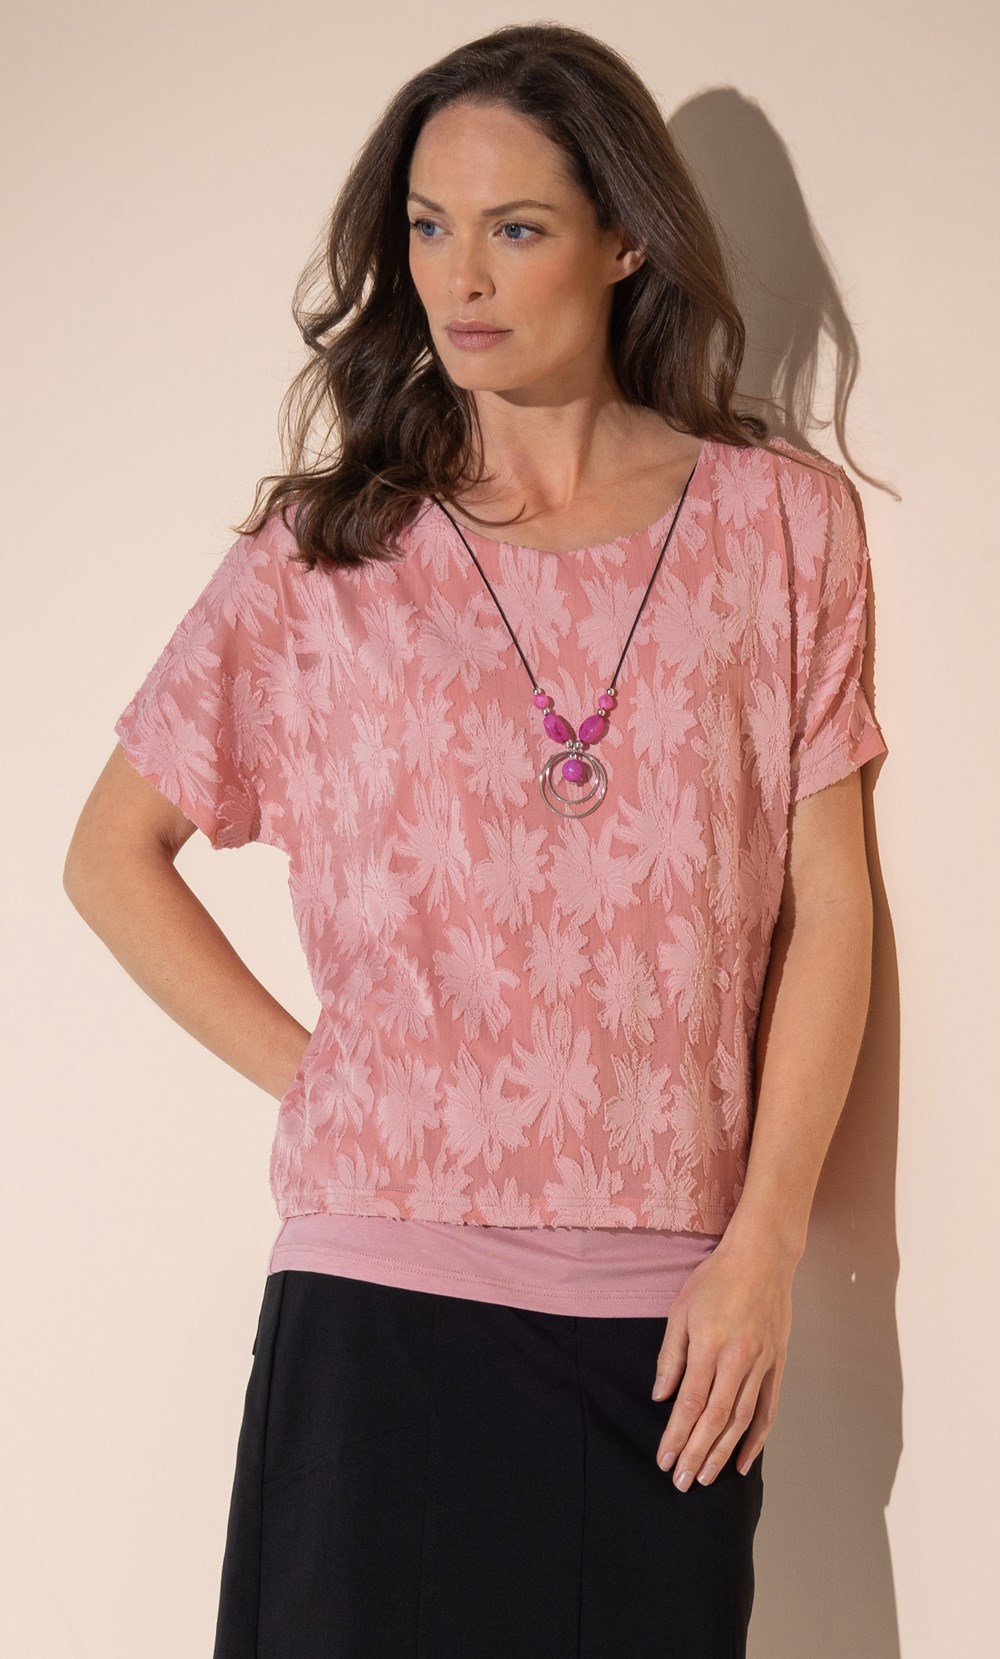 Layered Floral Top With Necklace